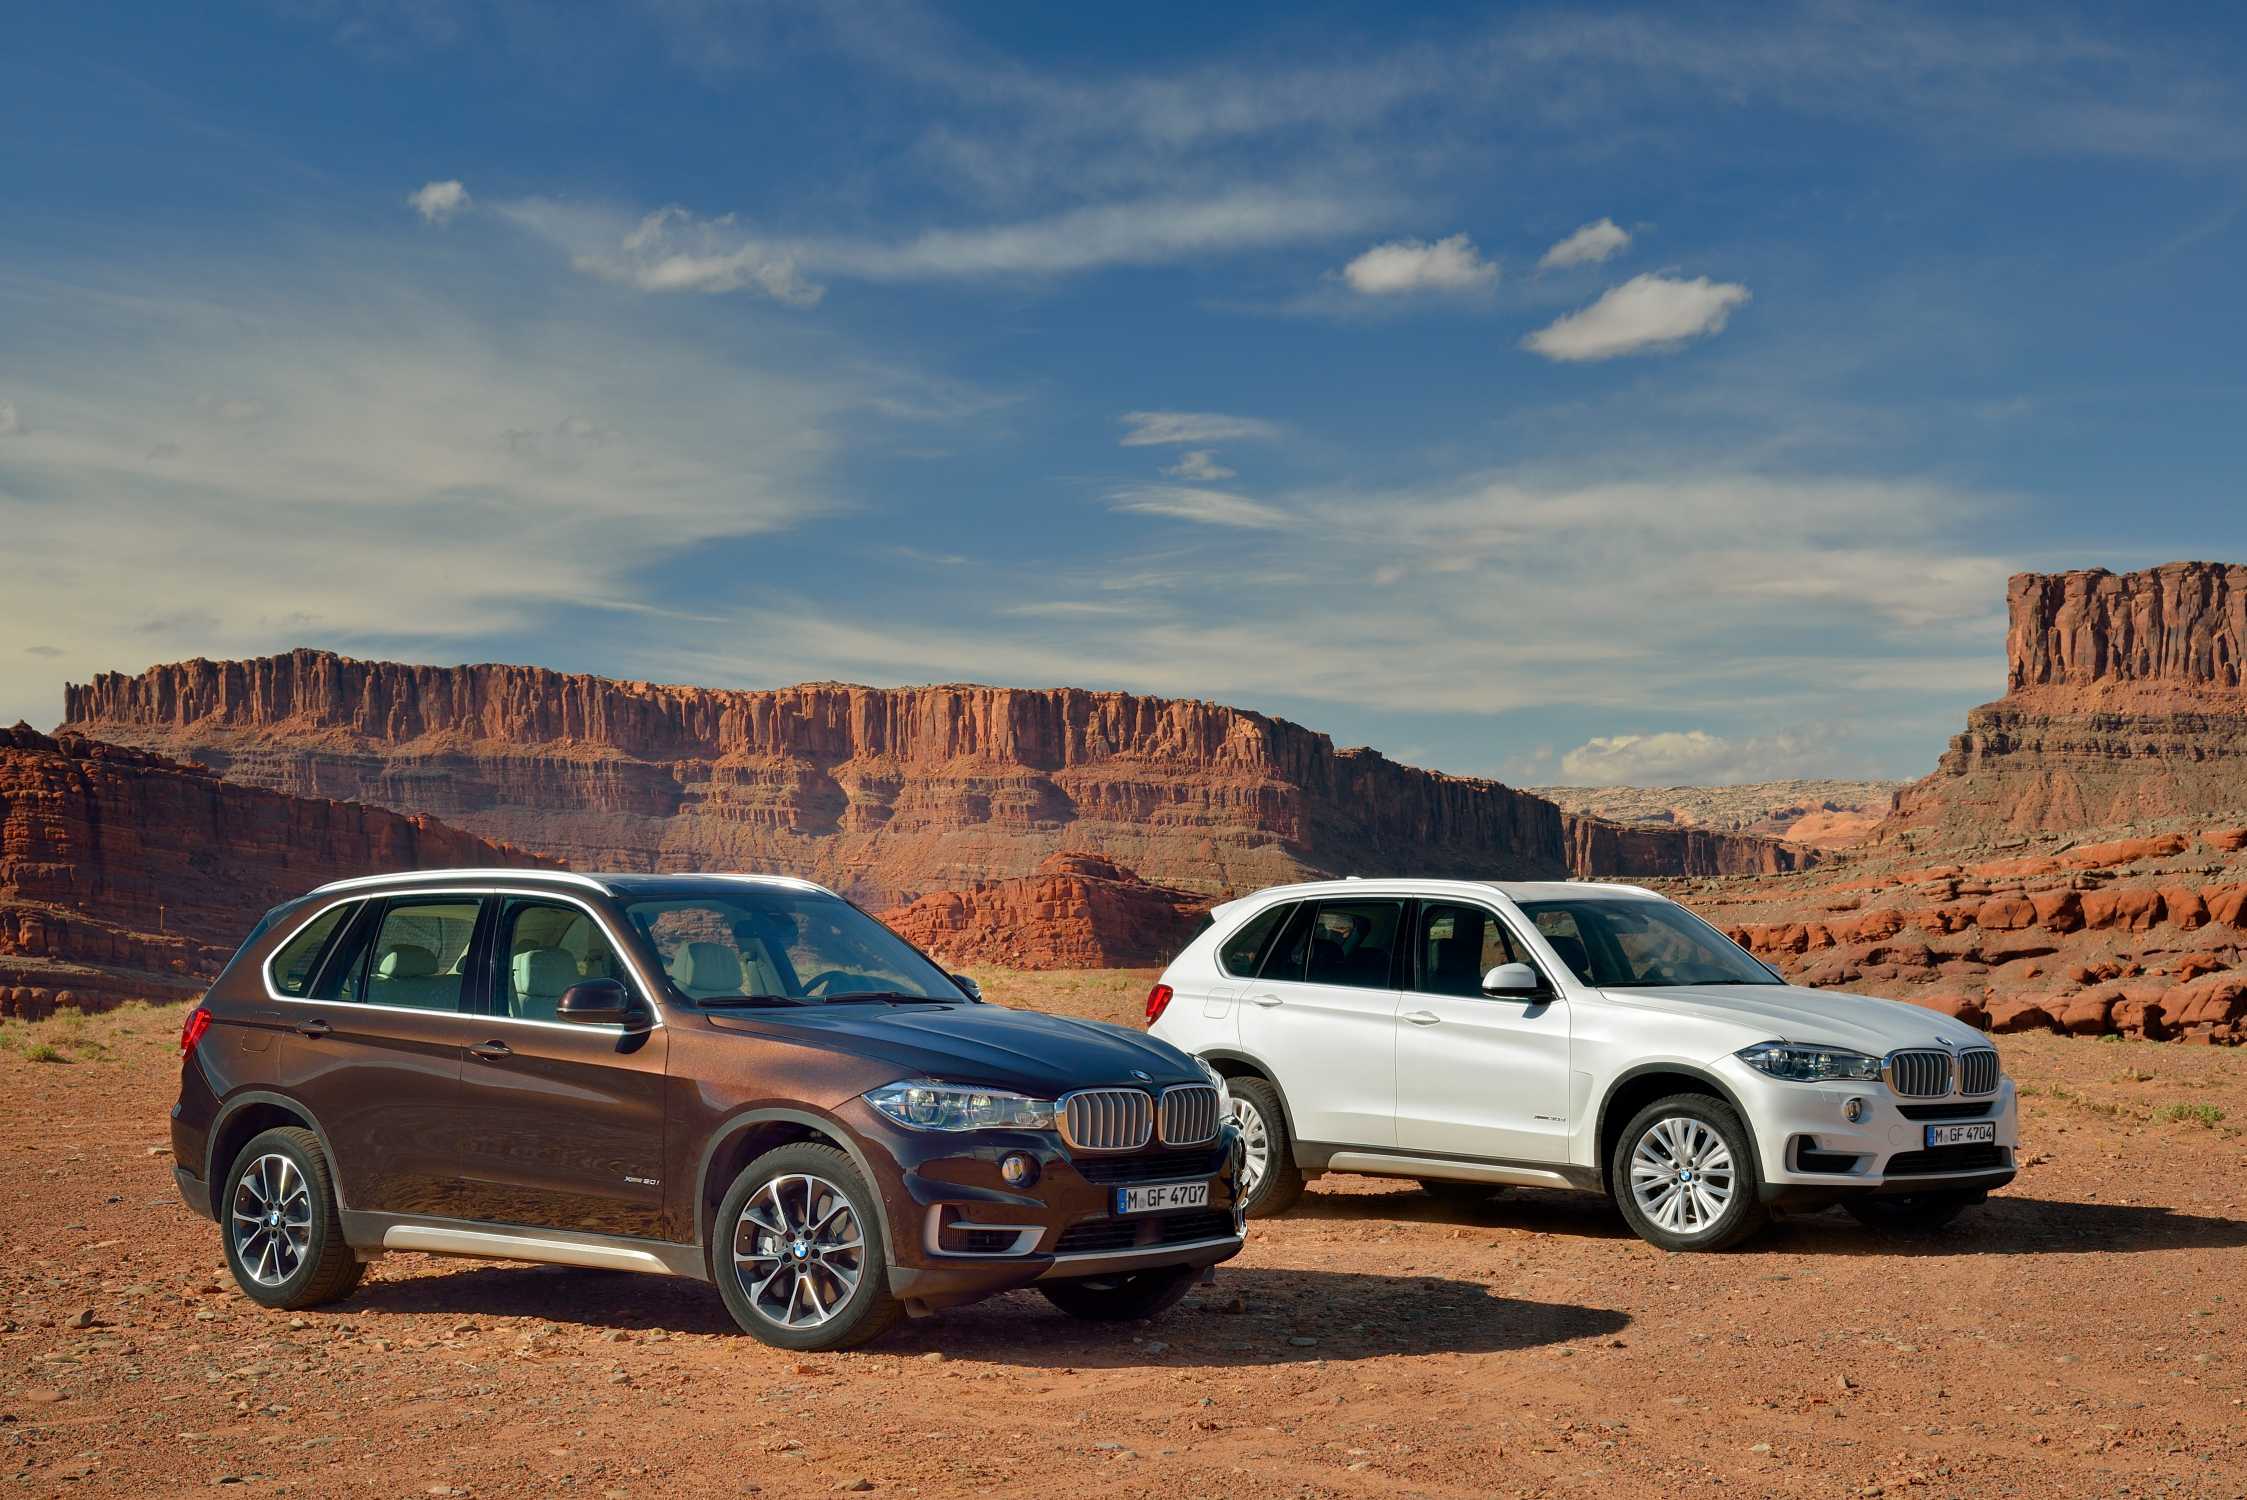 The new BMW X5 xDrive50i in Sparkling Brown and the new BMW X5 xDrive30d in Mineralwhite 
(05/2013)